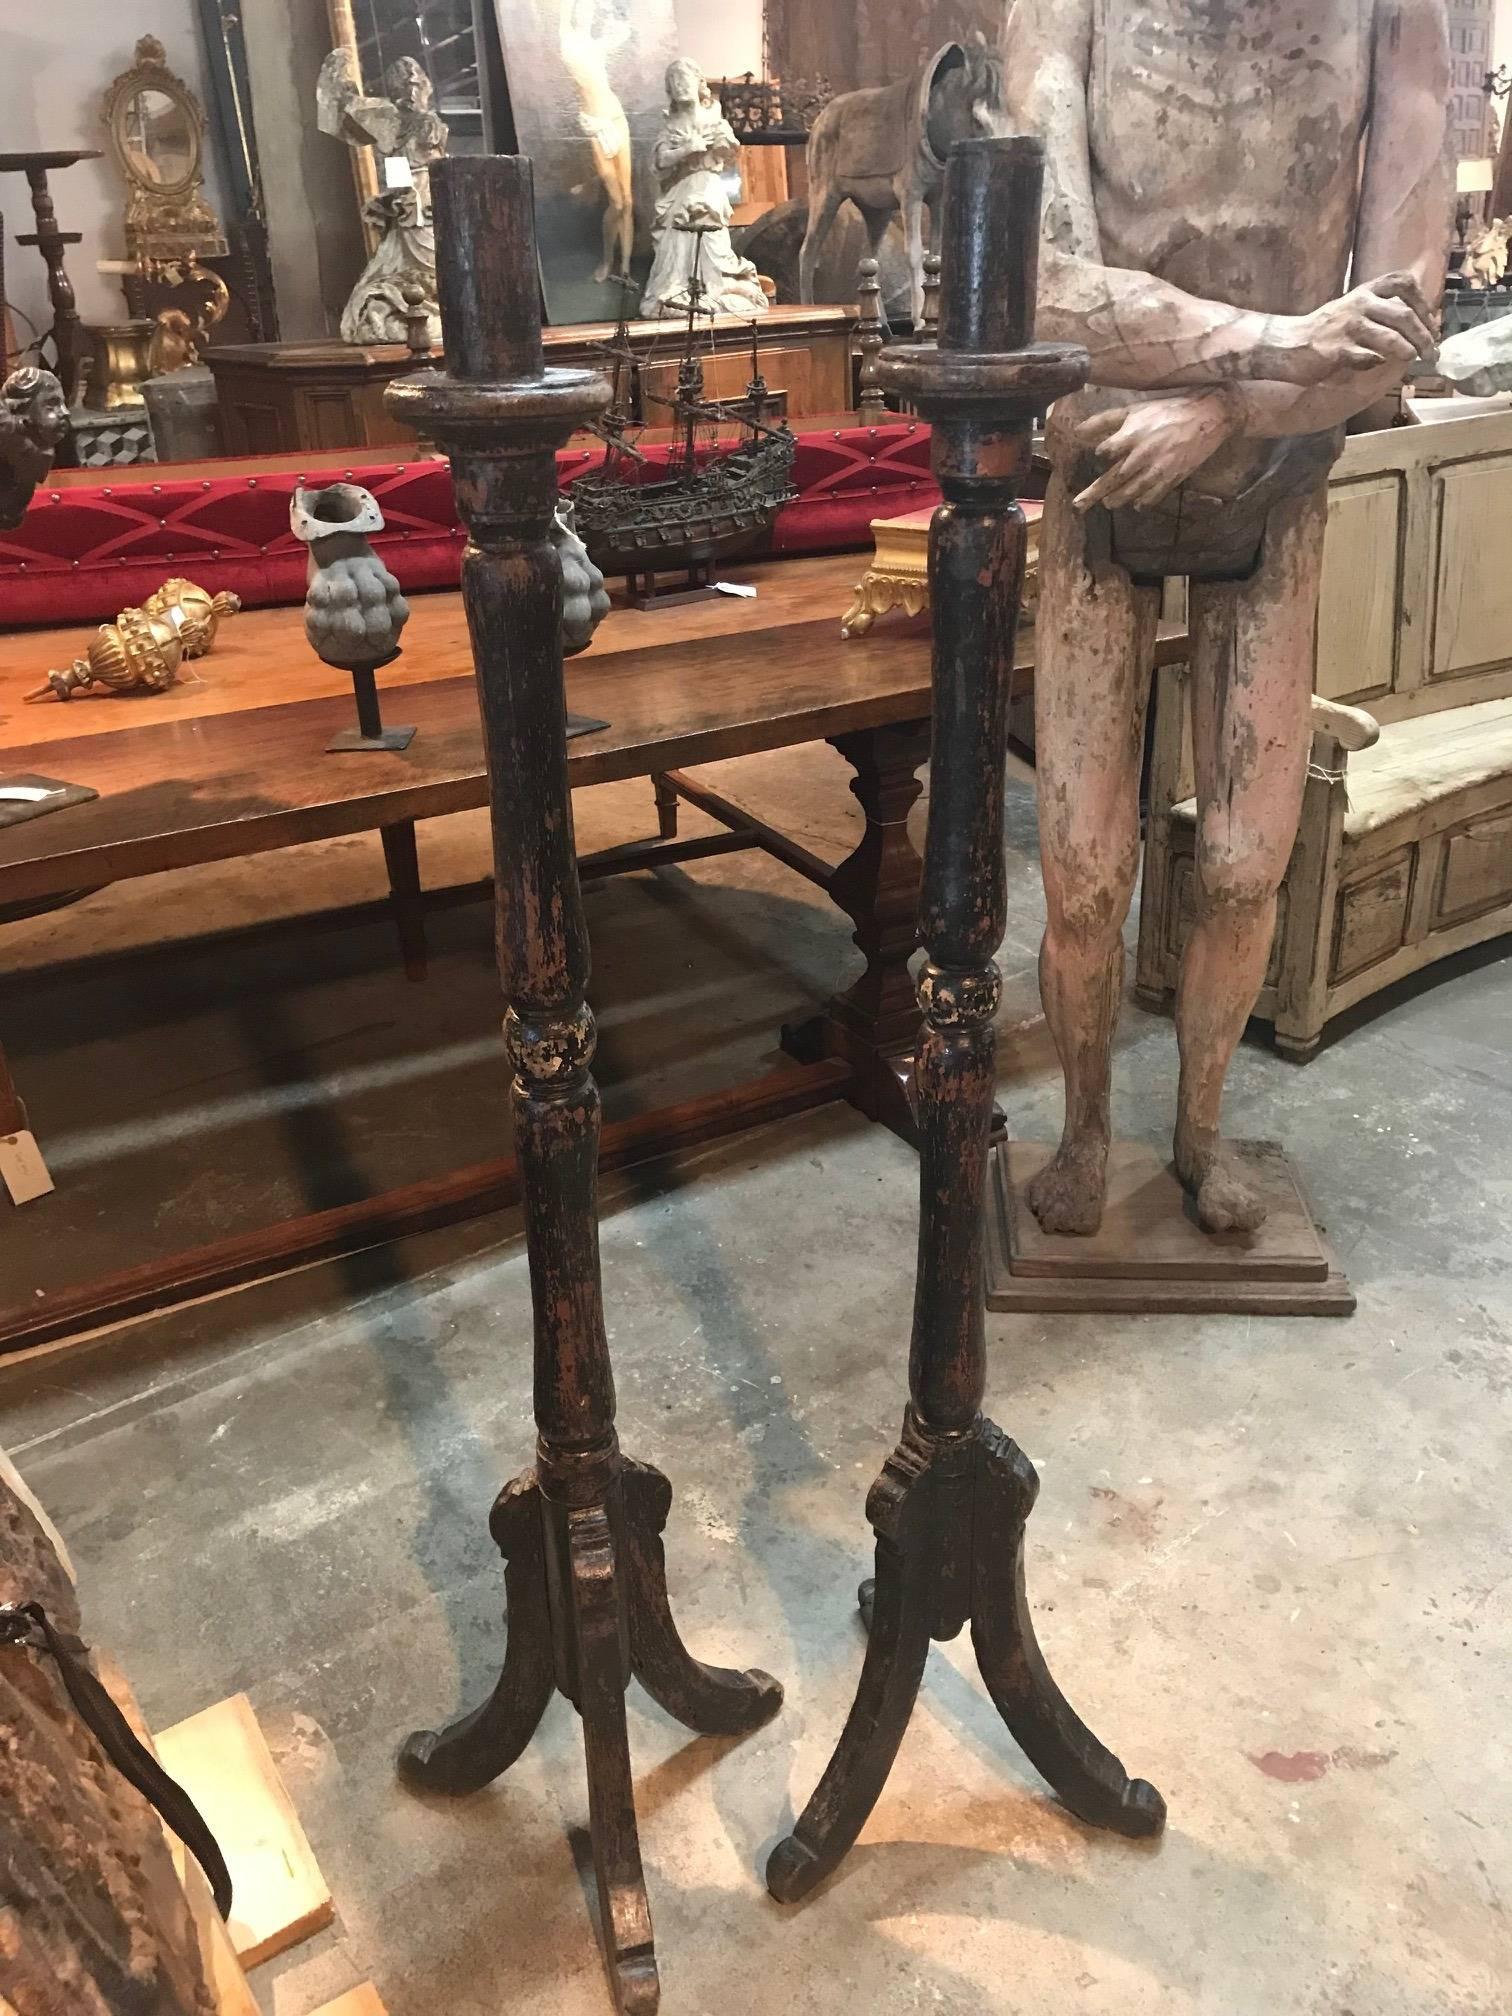 A wonderful pair of 17th century large altar sticks, altar torcheres from the Catalan region of Spain. Handsomely constructed from painted wood with a nicely turned shaft on tripod feet. Terrific patina.